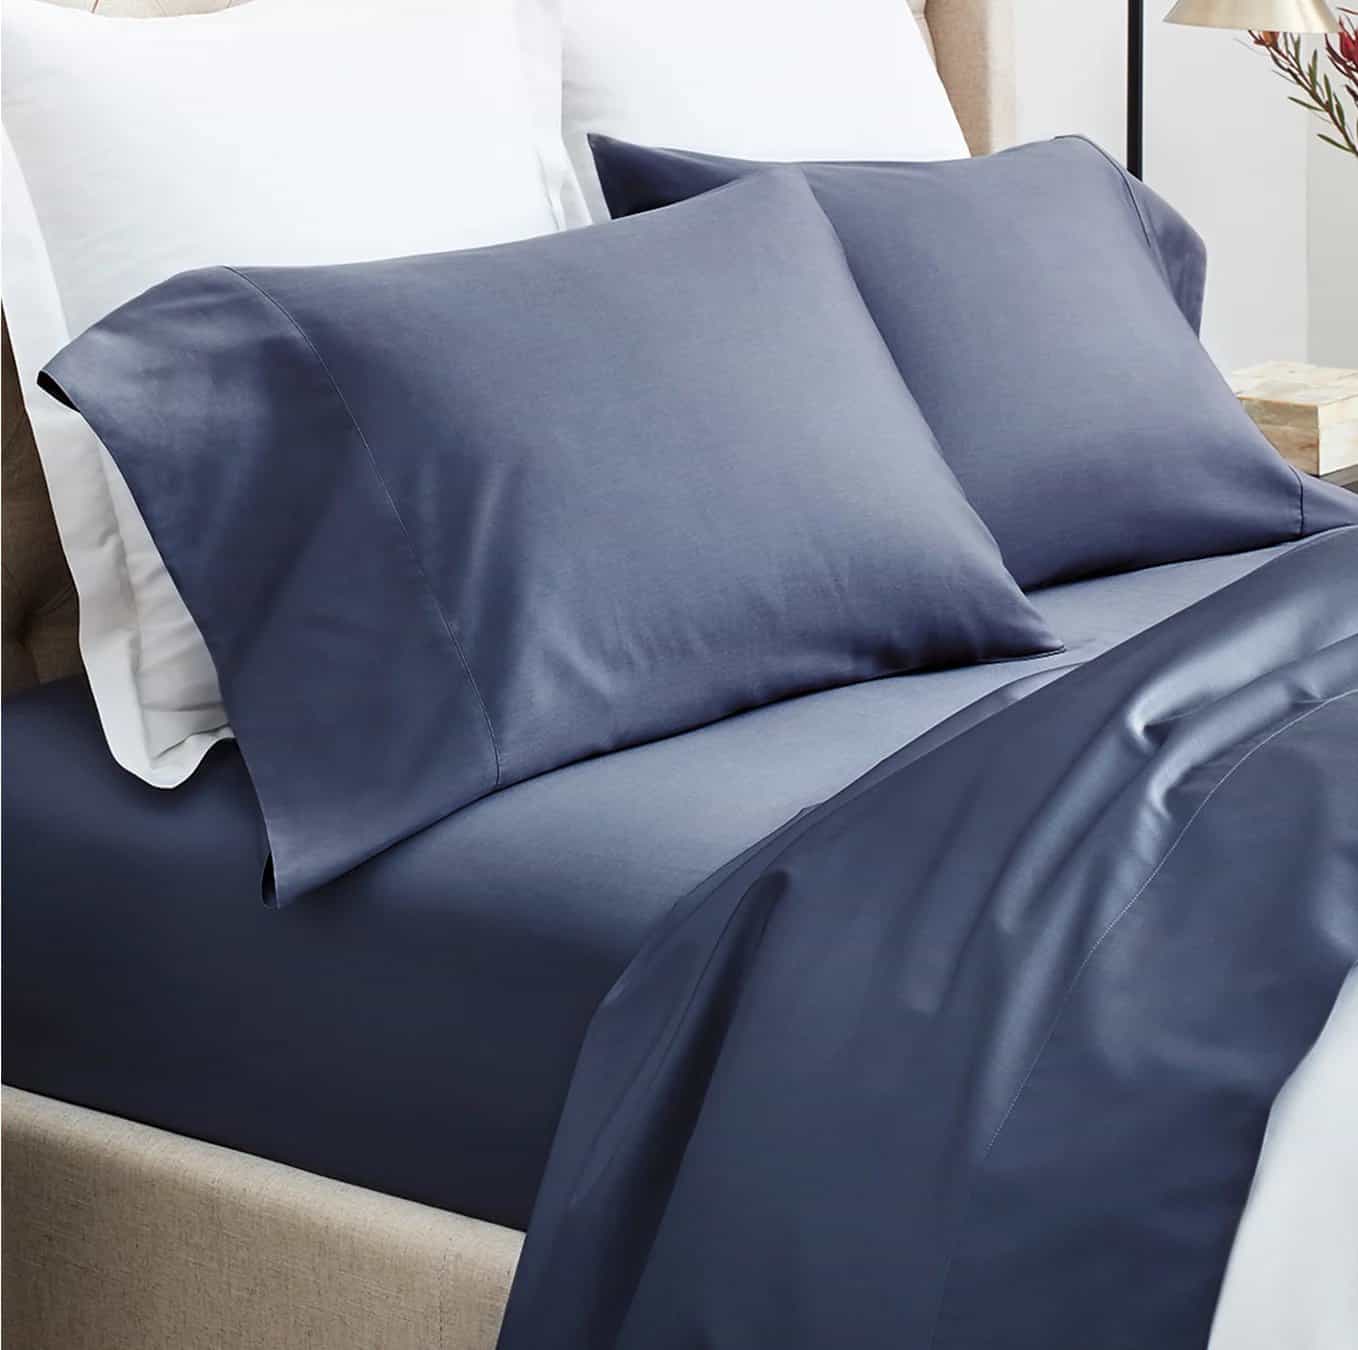 Navy Sheets Work Wonders Against A White Comforter